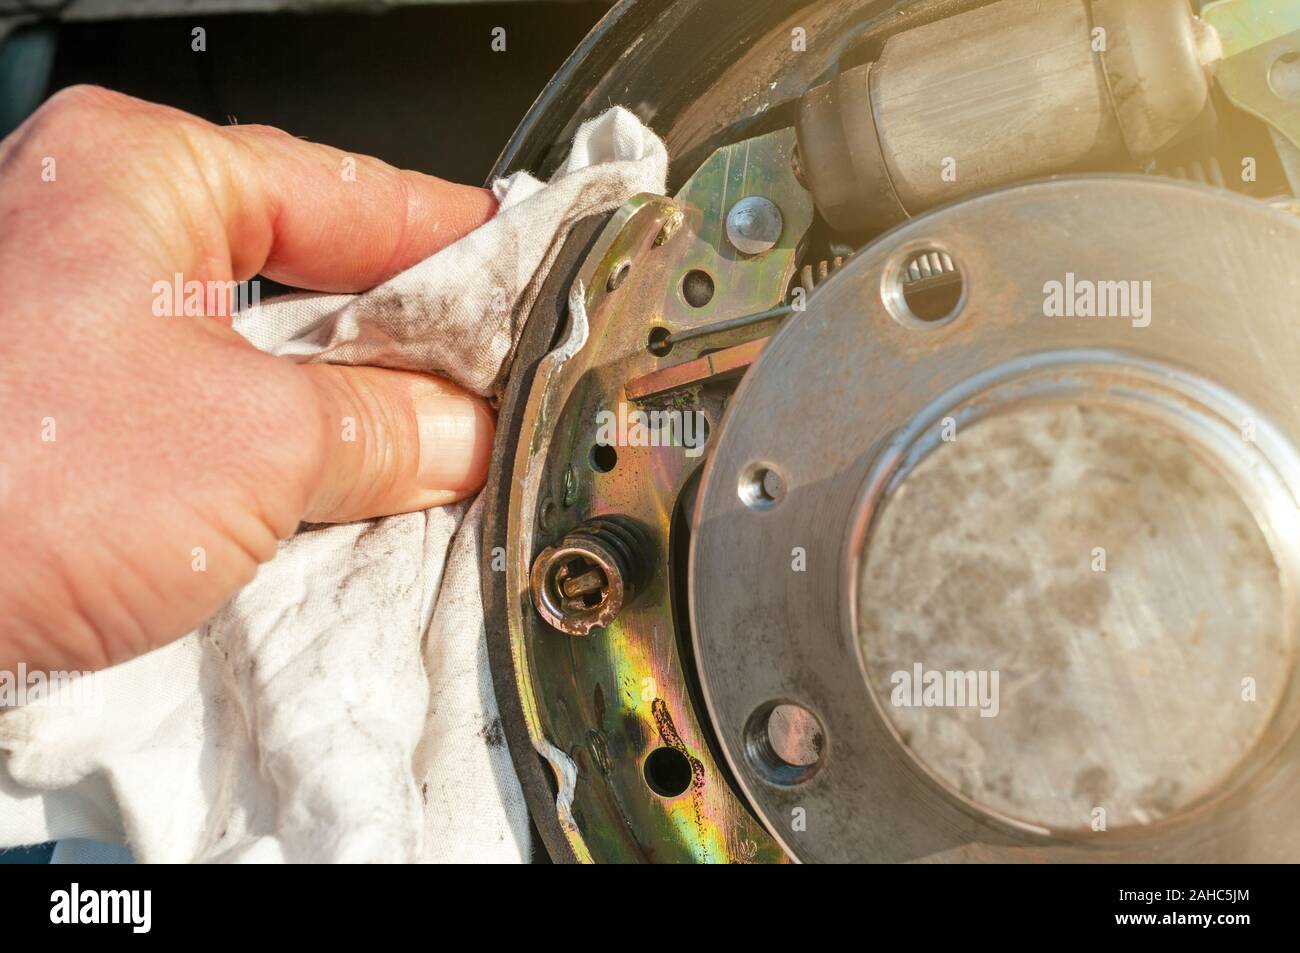 Car drum brake cleaning with rag Stock Photo